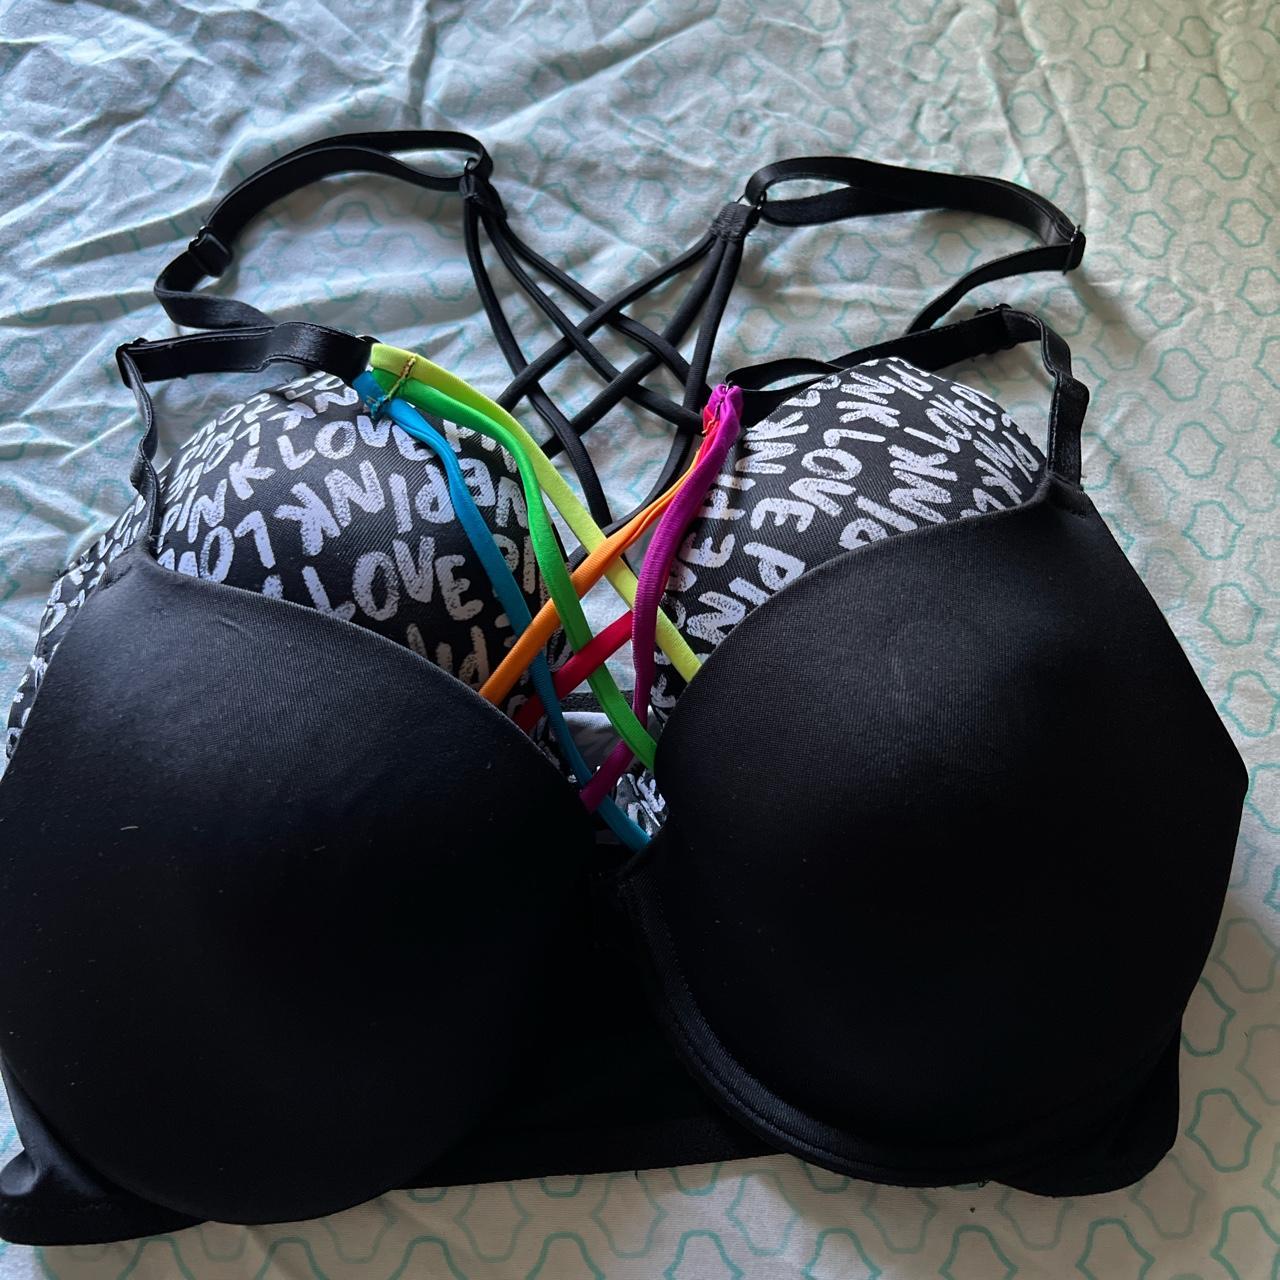 Wear Everywhere Front-Close T-Shirt Lightly Lined Bra